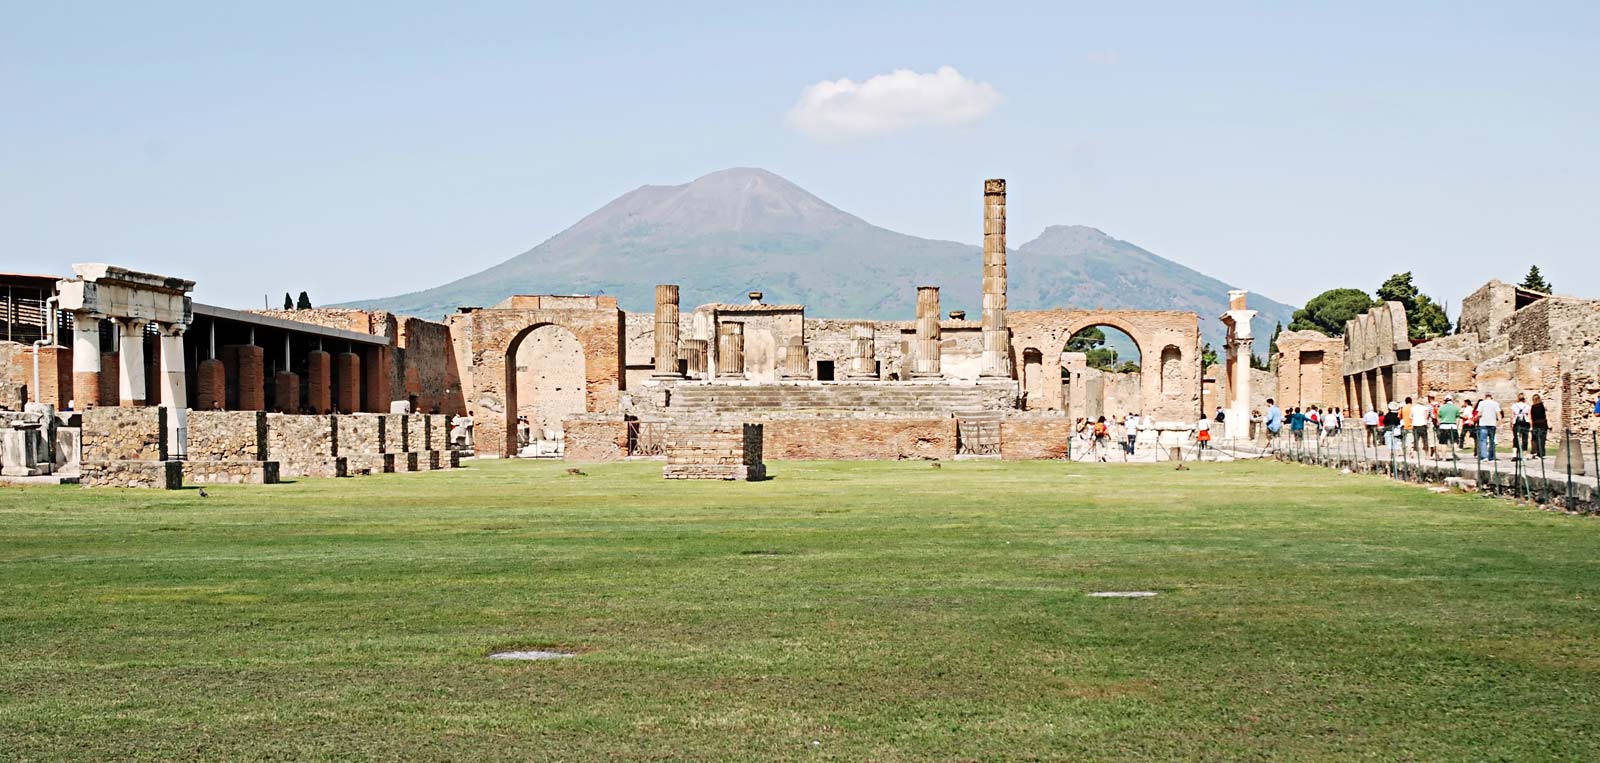 Well preserved ‘fast food’ bar unearthed in Pompeii